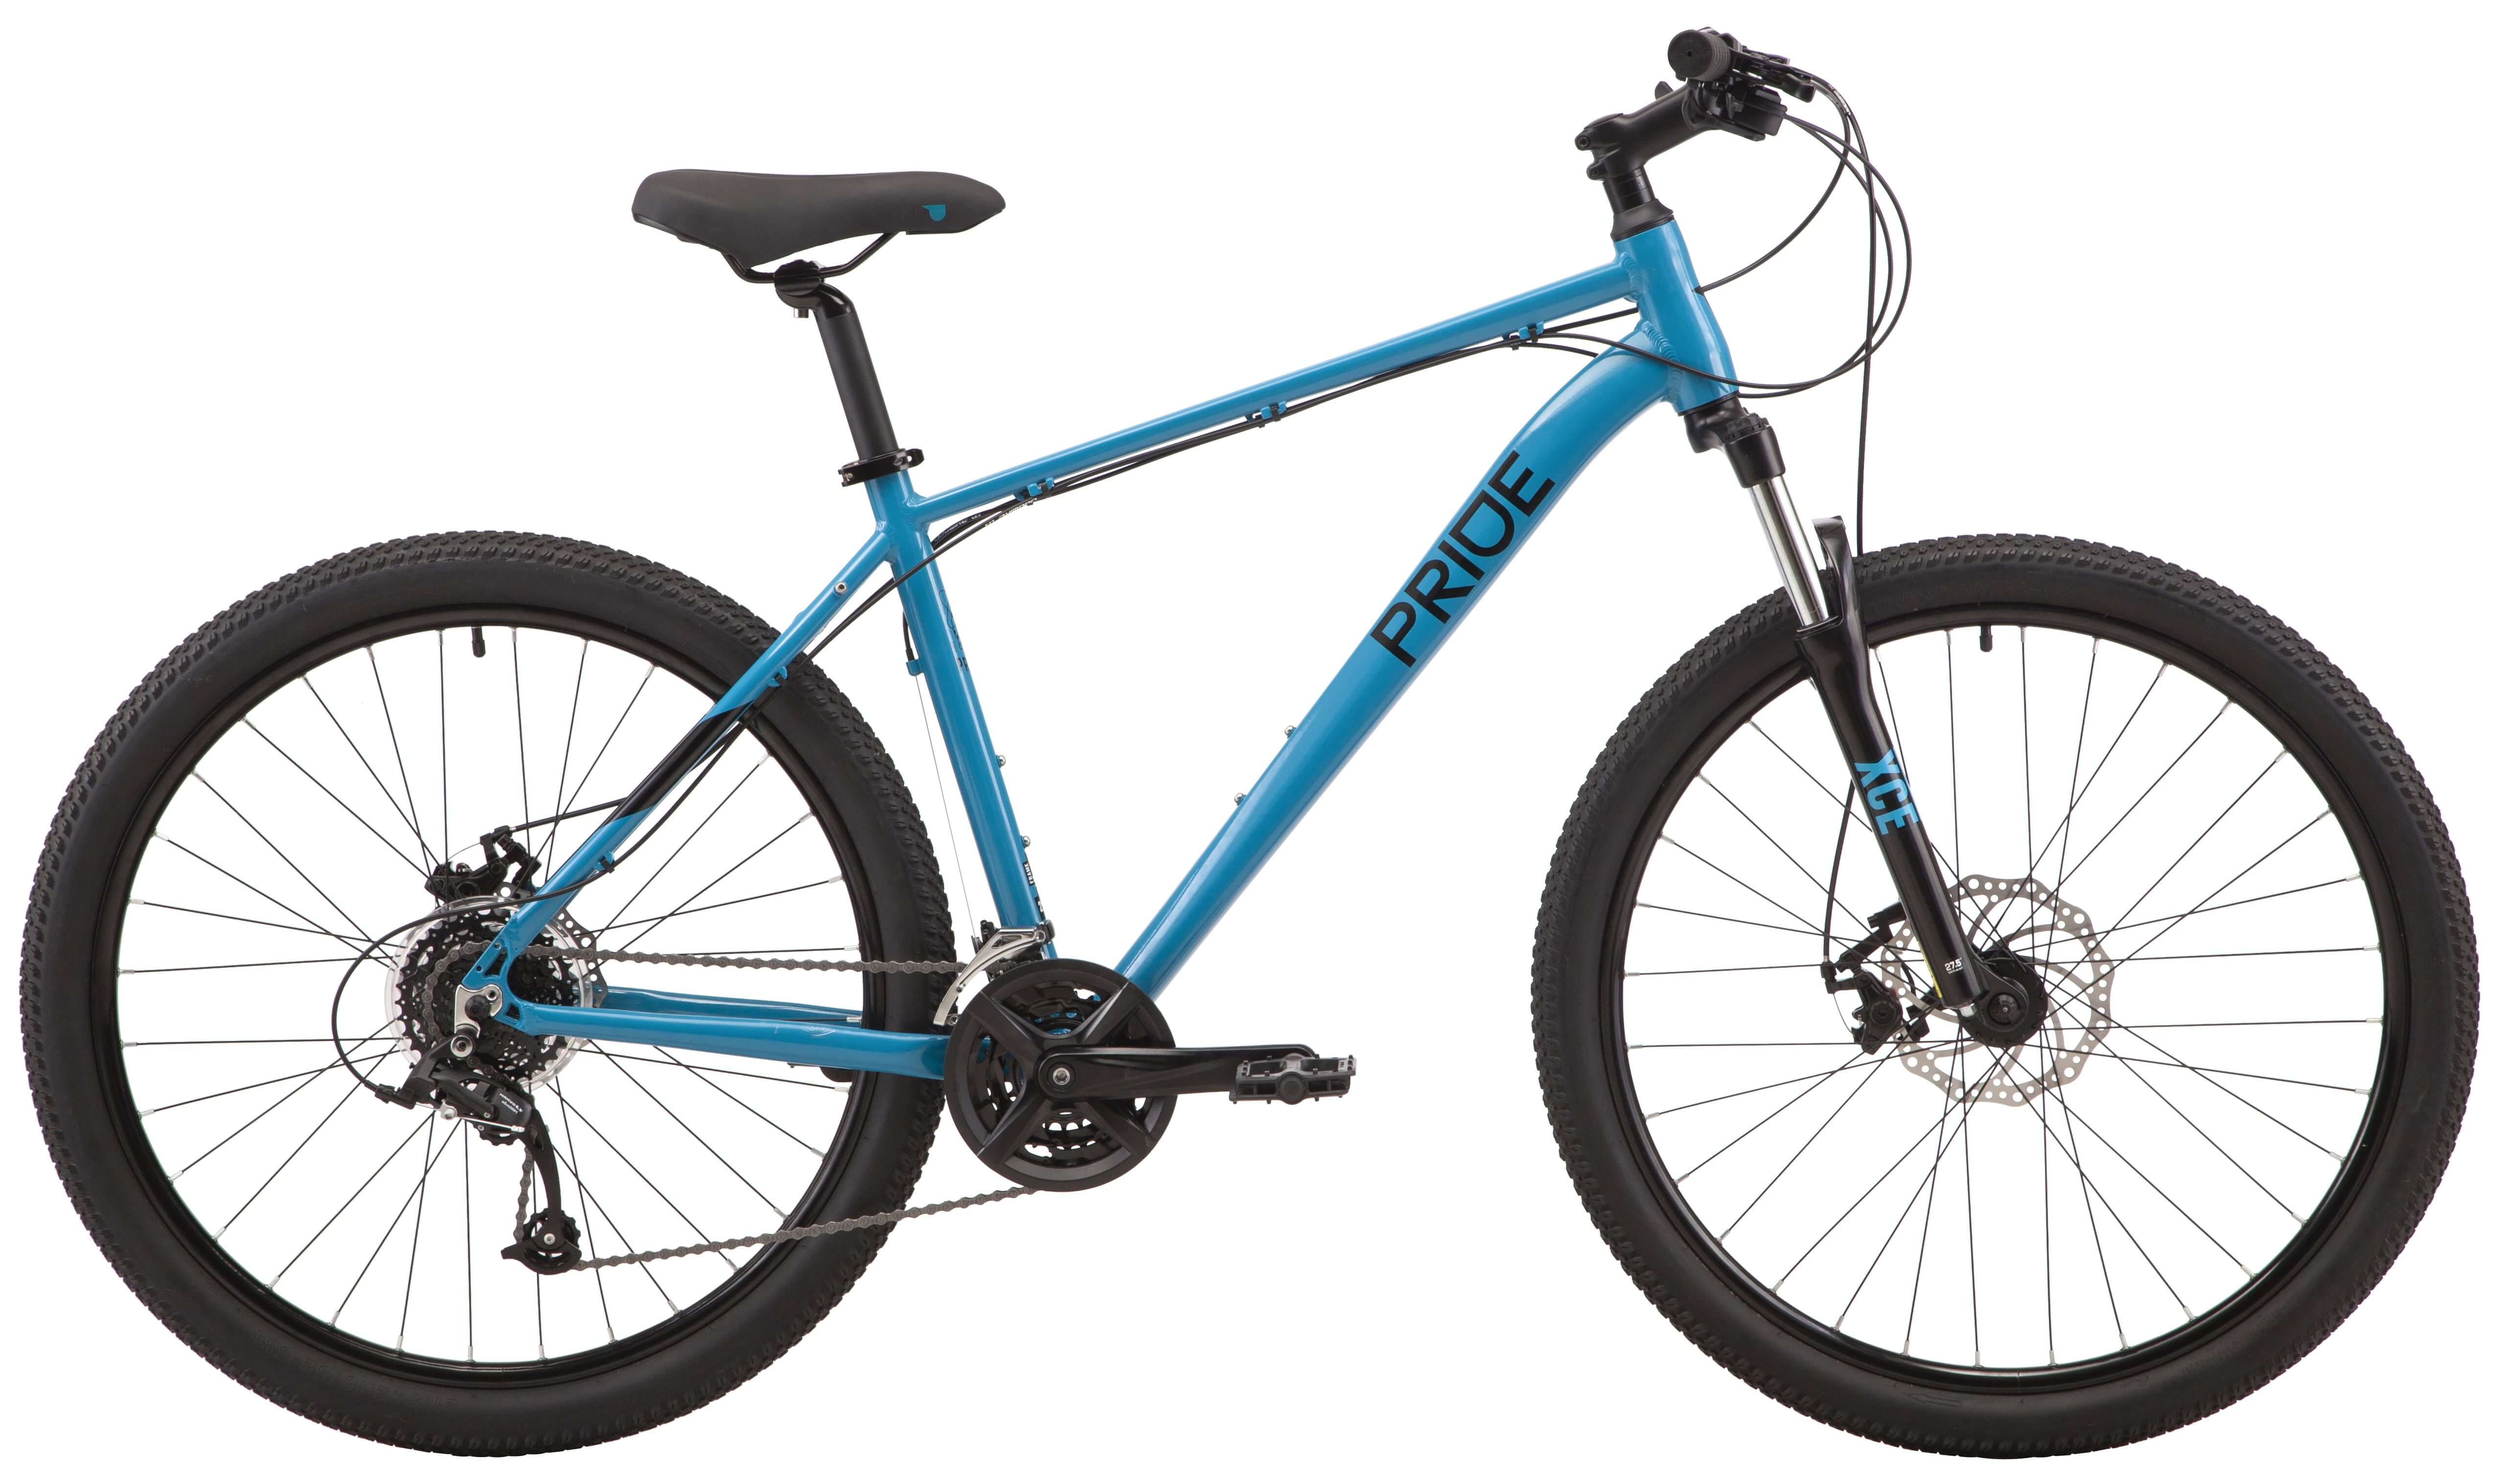 27.5" PRIDE MARVEL 7.2 frame - M 2022 turquoise (rear and front switches and tamnet - Microshift) Photo